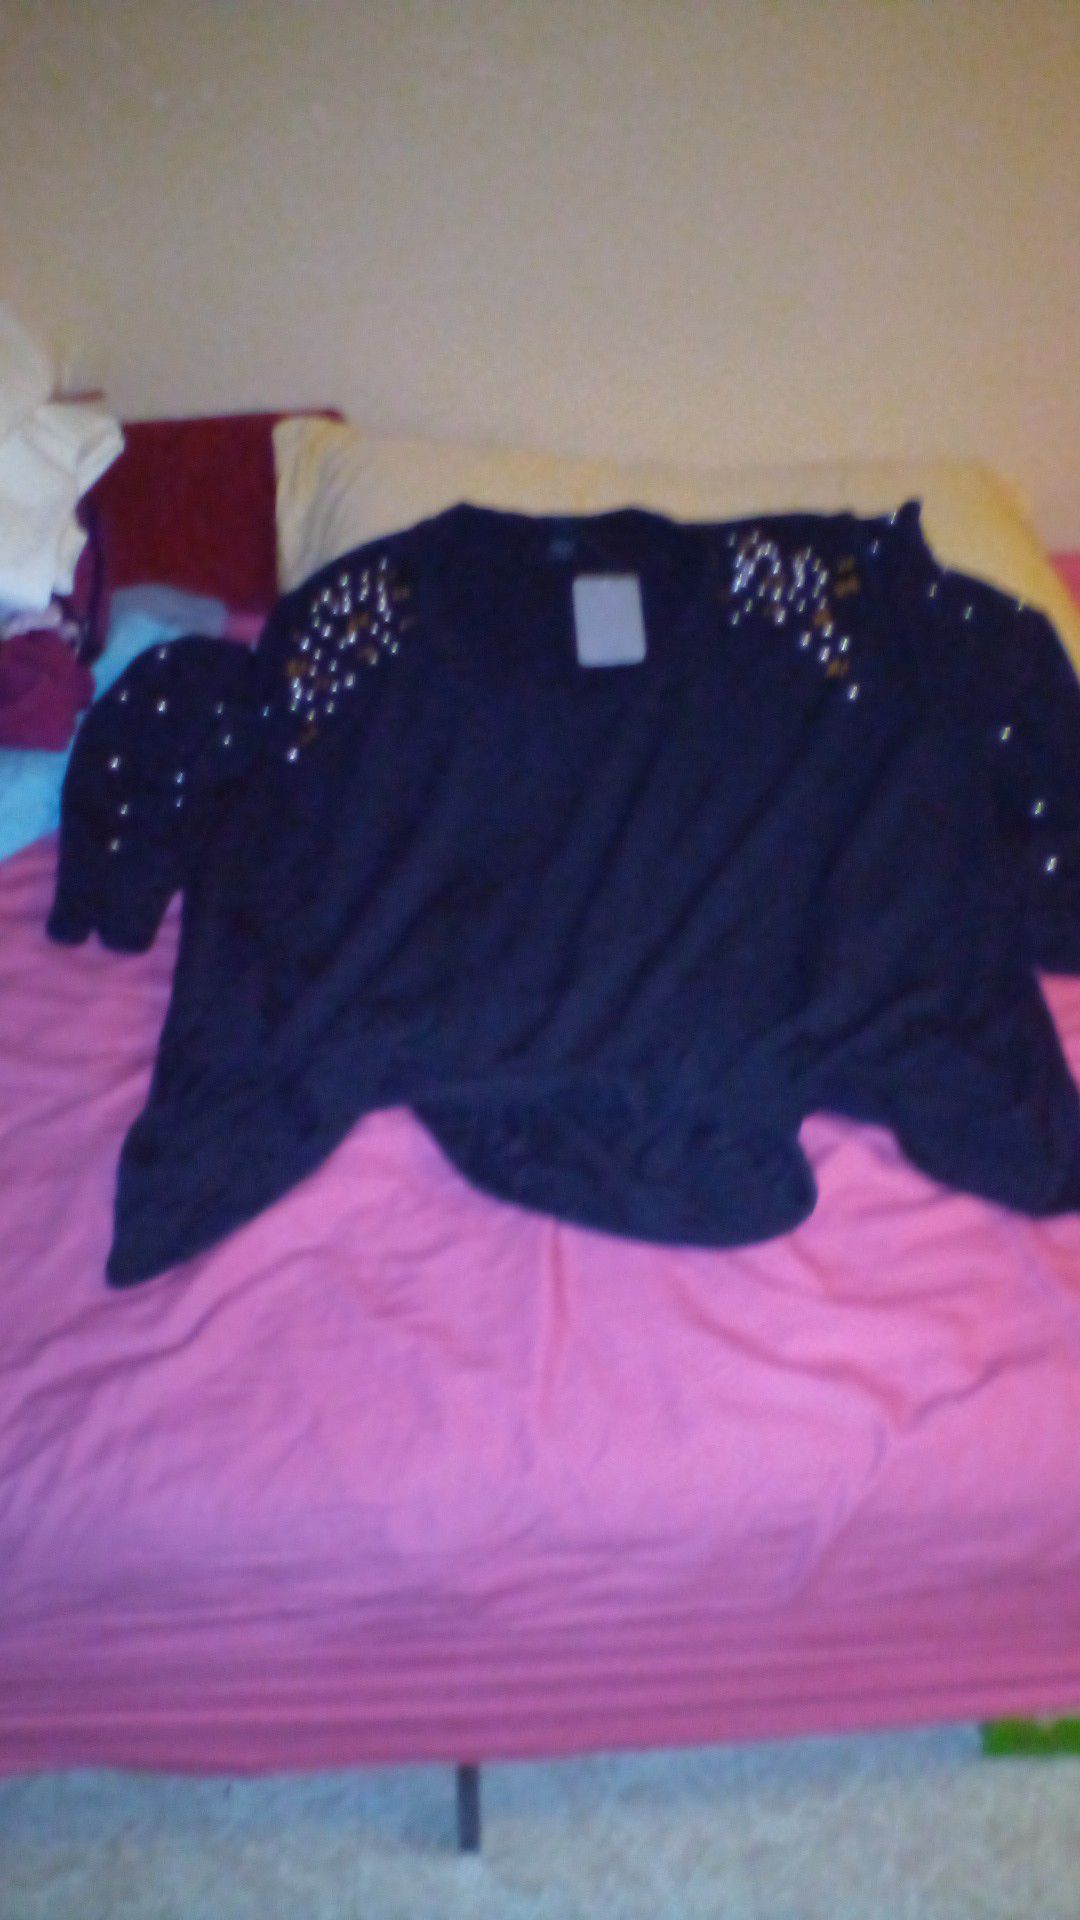 Disney pearls and bows long sleeve shirt 59.00 with tag